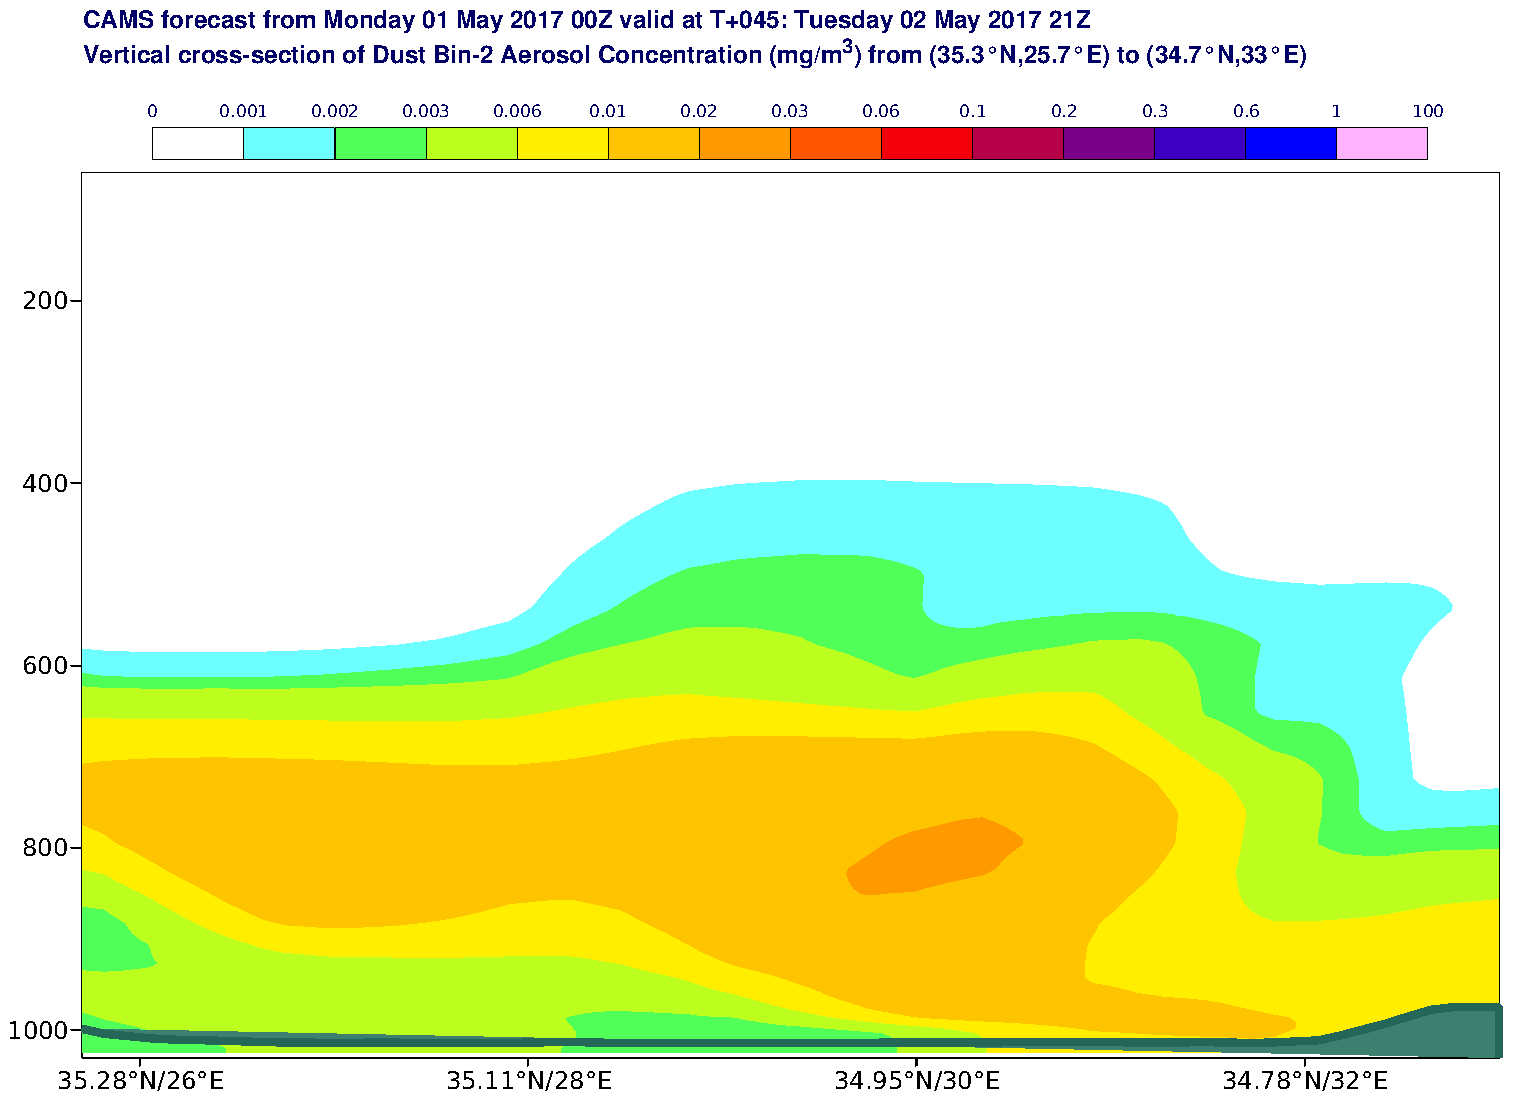 Vertical cross-section of Dust Bin-2 Aerosol Concentration (mg/m3) valid at T45 - 2017-05-02 21:00